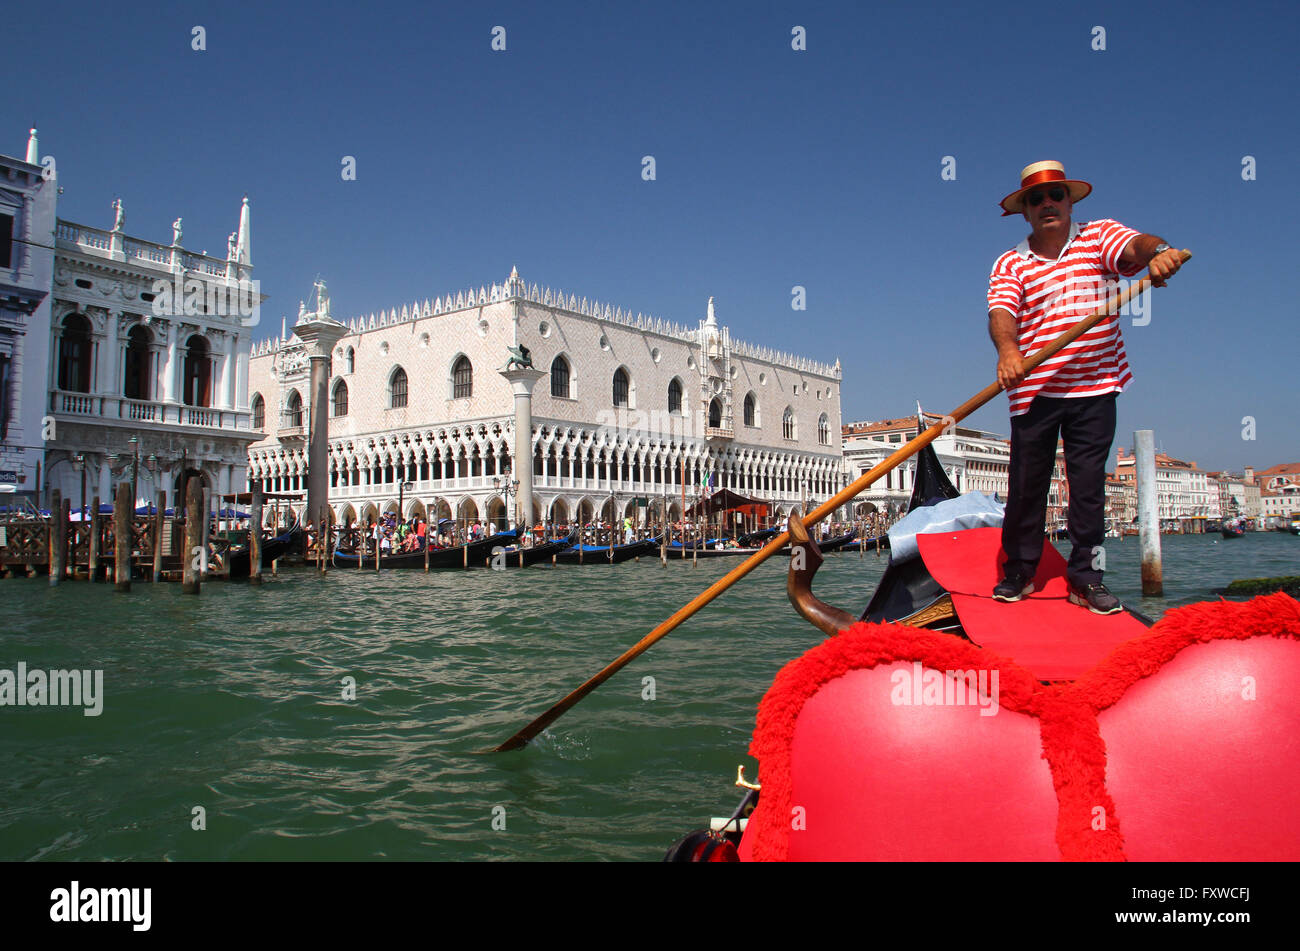 GONDOLIER IN RED HOOPS GRAND CANAL VENICE ITALY 04 August 2014 Stock Photo